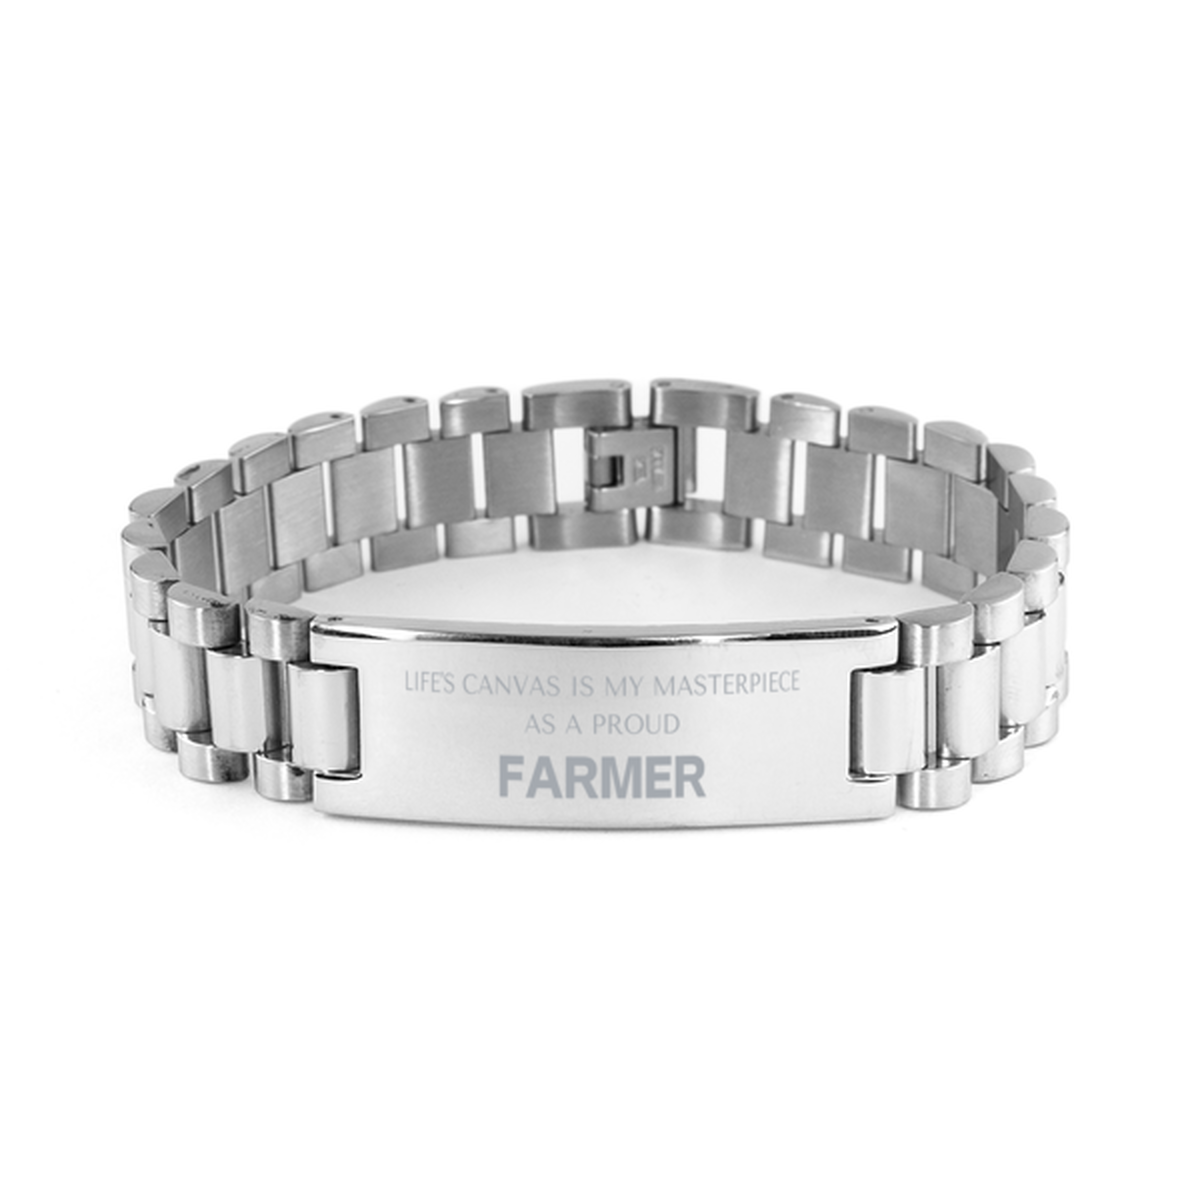 Proud Farmer Gifts, Life's canvas is my masterpiece, Epic Birthday Christmas Unique Ladder Stainless Steel Bracelet For Farmer, Coworkers, Men, Women, Friends